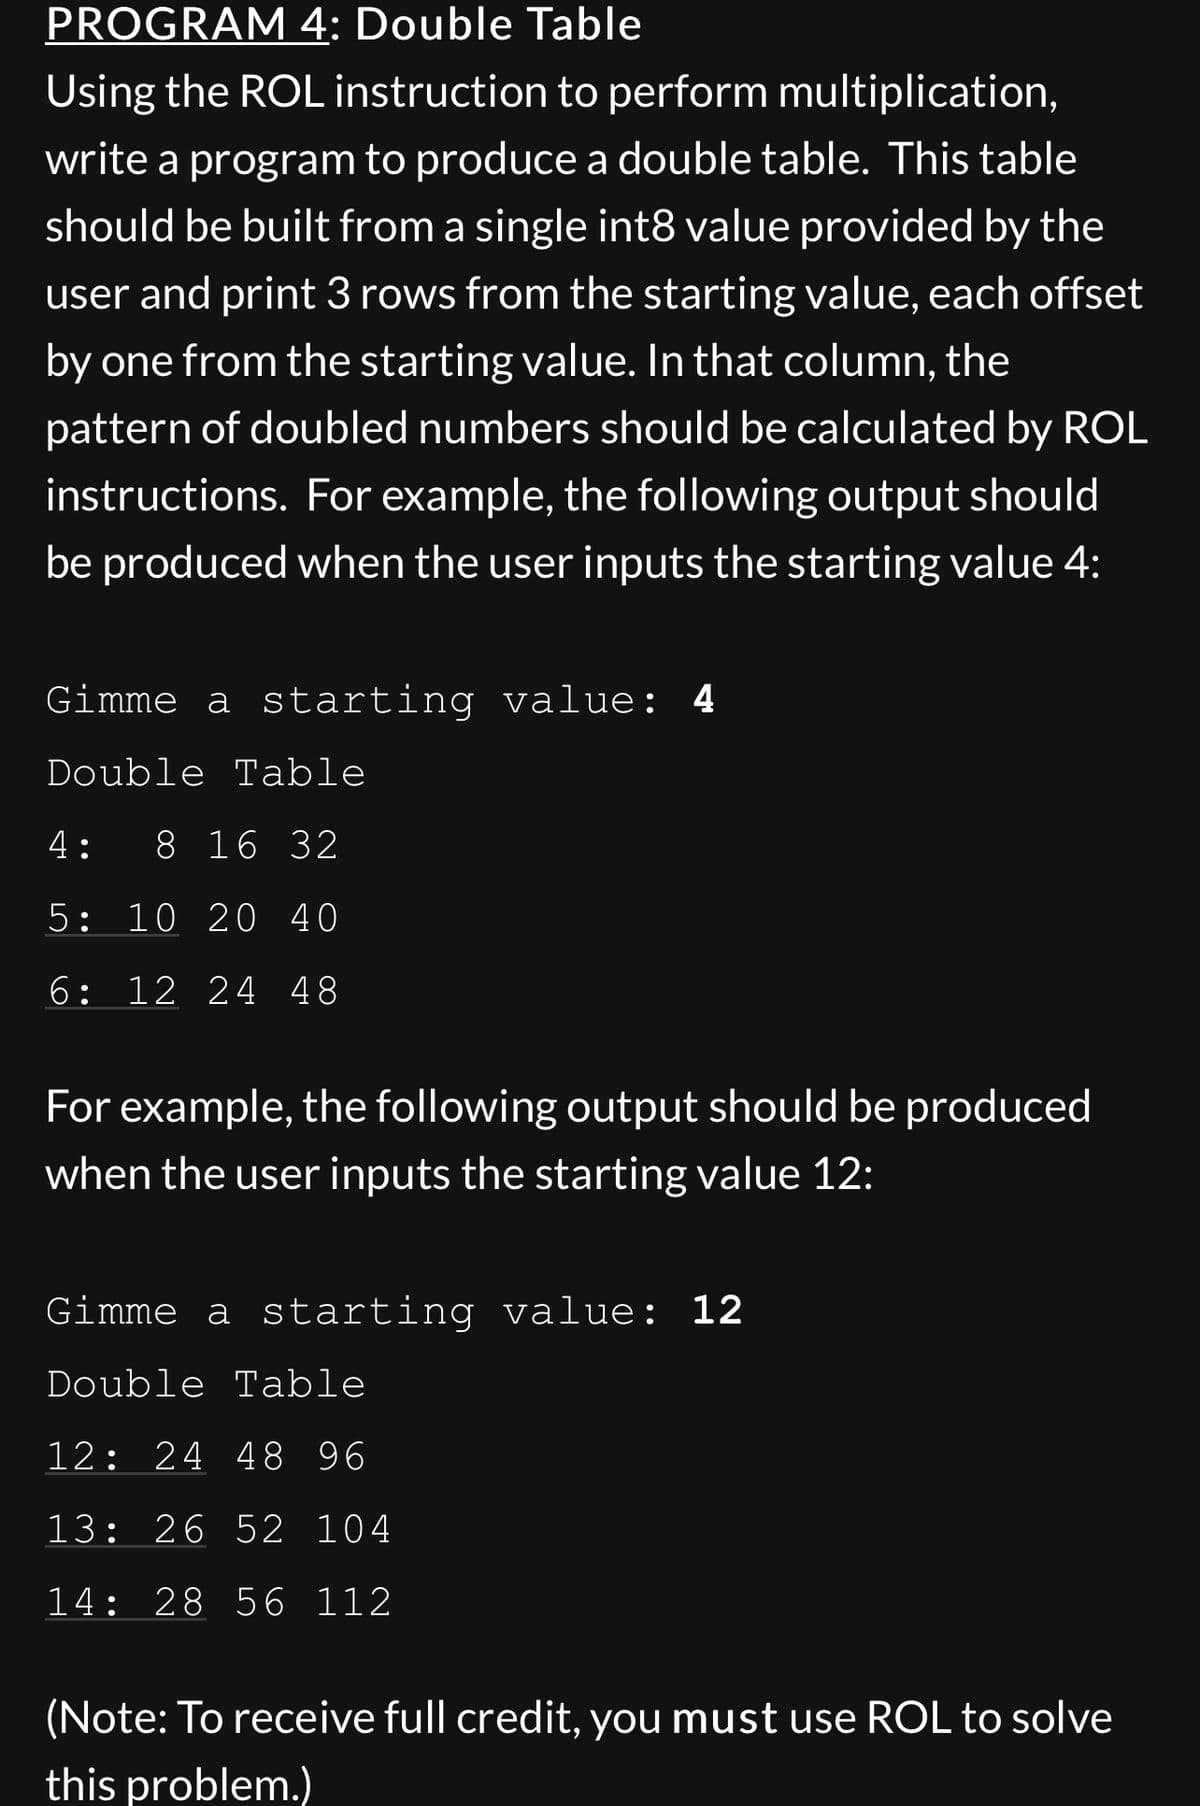 PROGRAM 4: Double Table
Using the ROL instruction to perform multiplication,
write a program to produce a double table. This table
should be built from a single int8 value provided by the
user and print 3 rows from the starting value, each offset
by one from the starting value. In that column, the
pattern of doubled numbers should be calculated by ROL
instructions. For example, the following output should
be produced when the user inputs the starting value 4:
Gimme a starting value: 4
Double Table
4: 8 16 32
5: 10 20 40
6: 12 24 48
For example, the following output should be produced
when the user inputs the starting value 12:
Gimme a starting value: 12
Double Table
12: 24 48 96
13: 26 52 104
14: 28 56 112
(Note: To receive full credit, you must use ROL to solve
this problem.)